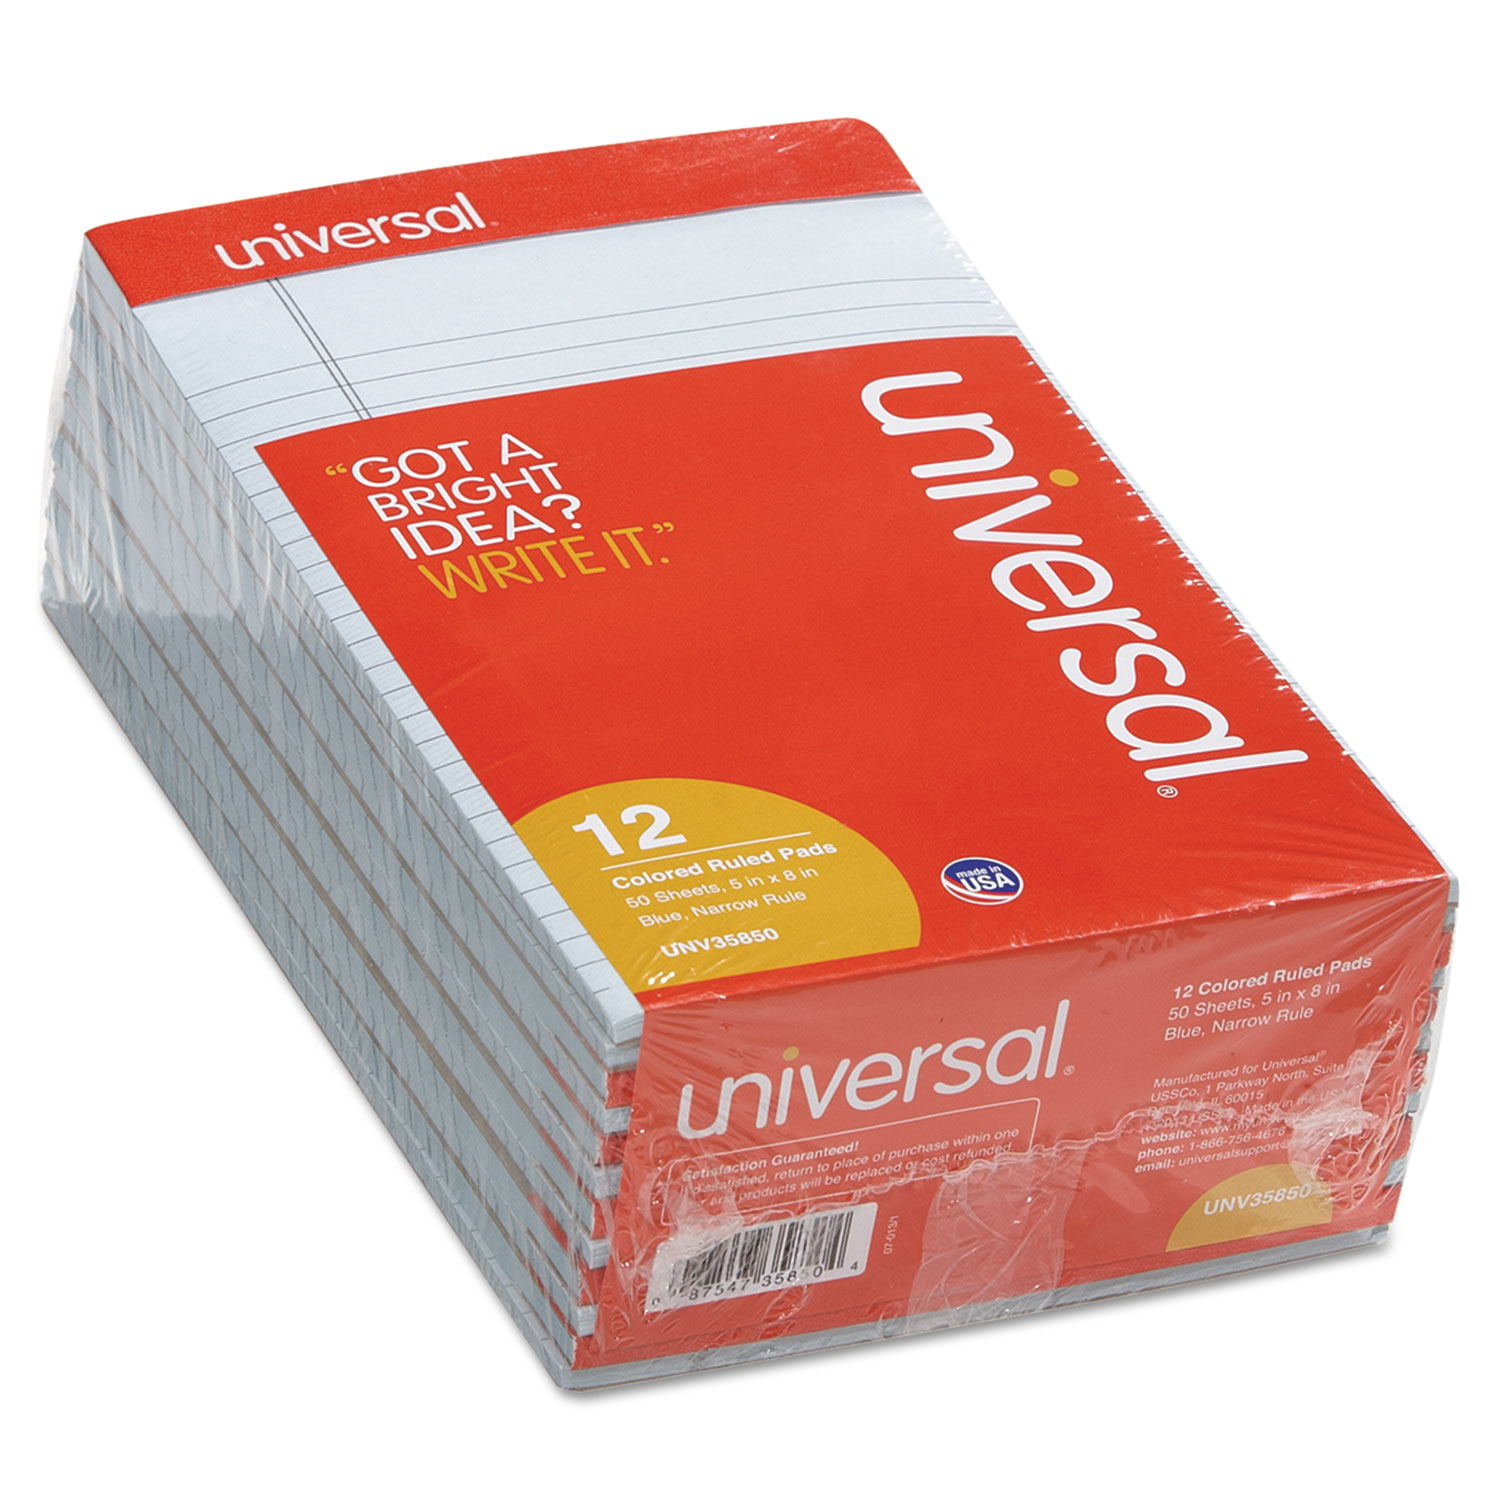  Universal UNV35850 Colored Perforated Writing Pads, Narrow Rule, 5 x 8, Blue, 50 Sheets, Dozen (UNV35850) 